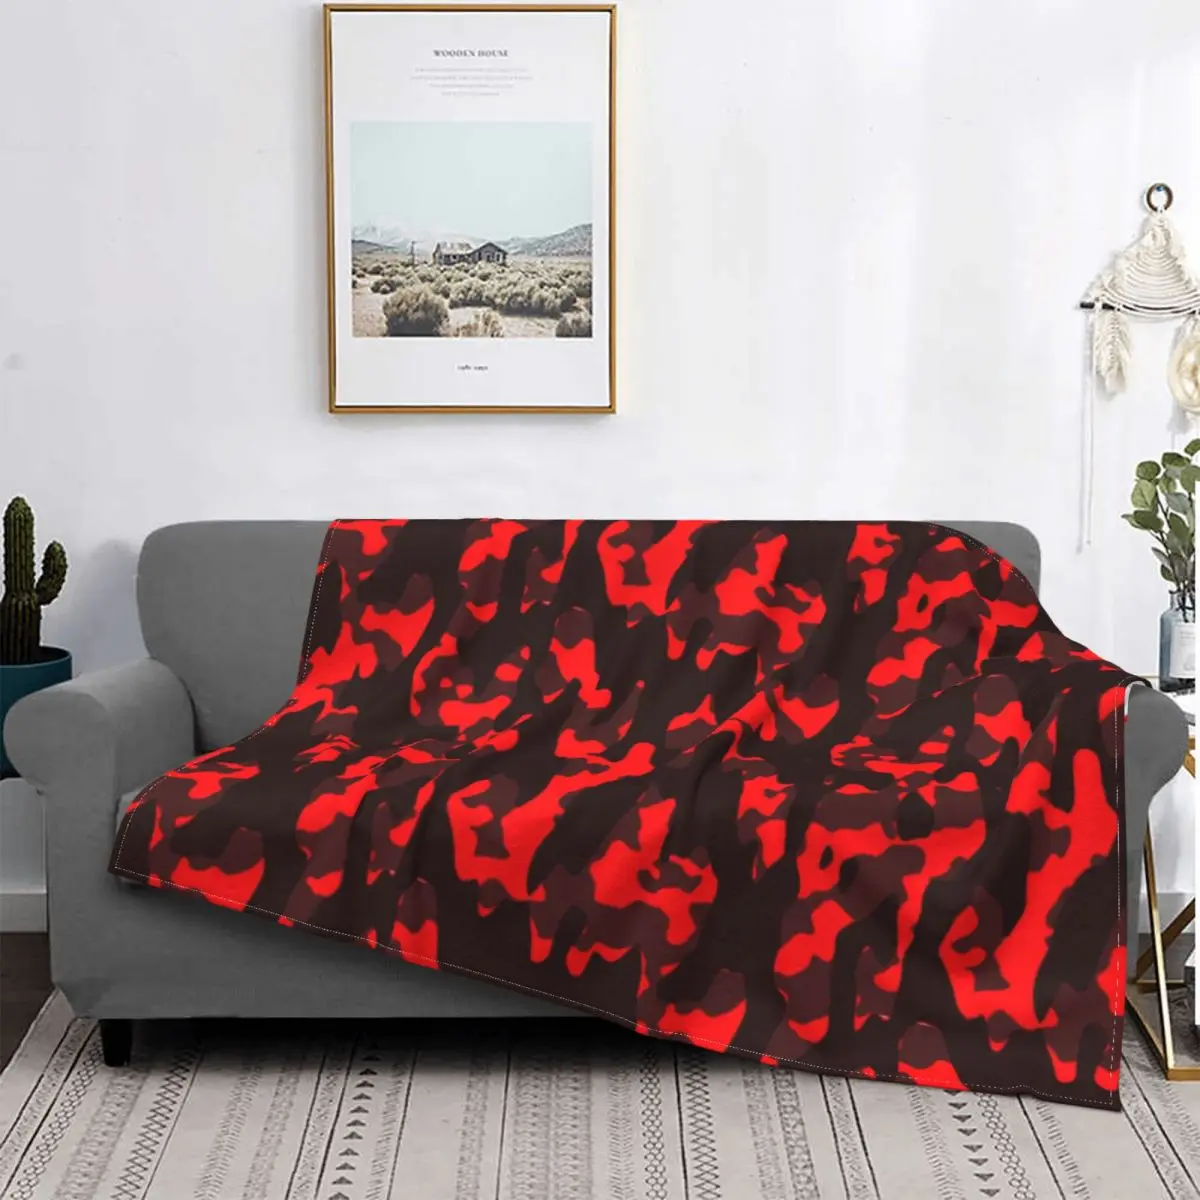 

Tree Camouflage Camo Throw Blanket Ultra-Soft Fleece Real Flannel Soldier Military Blankets for Bedding Travel Couch Bedspreads